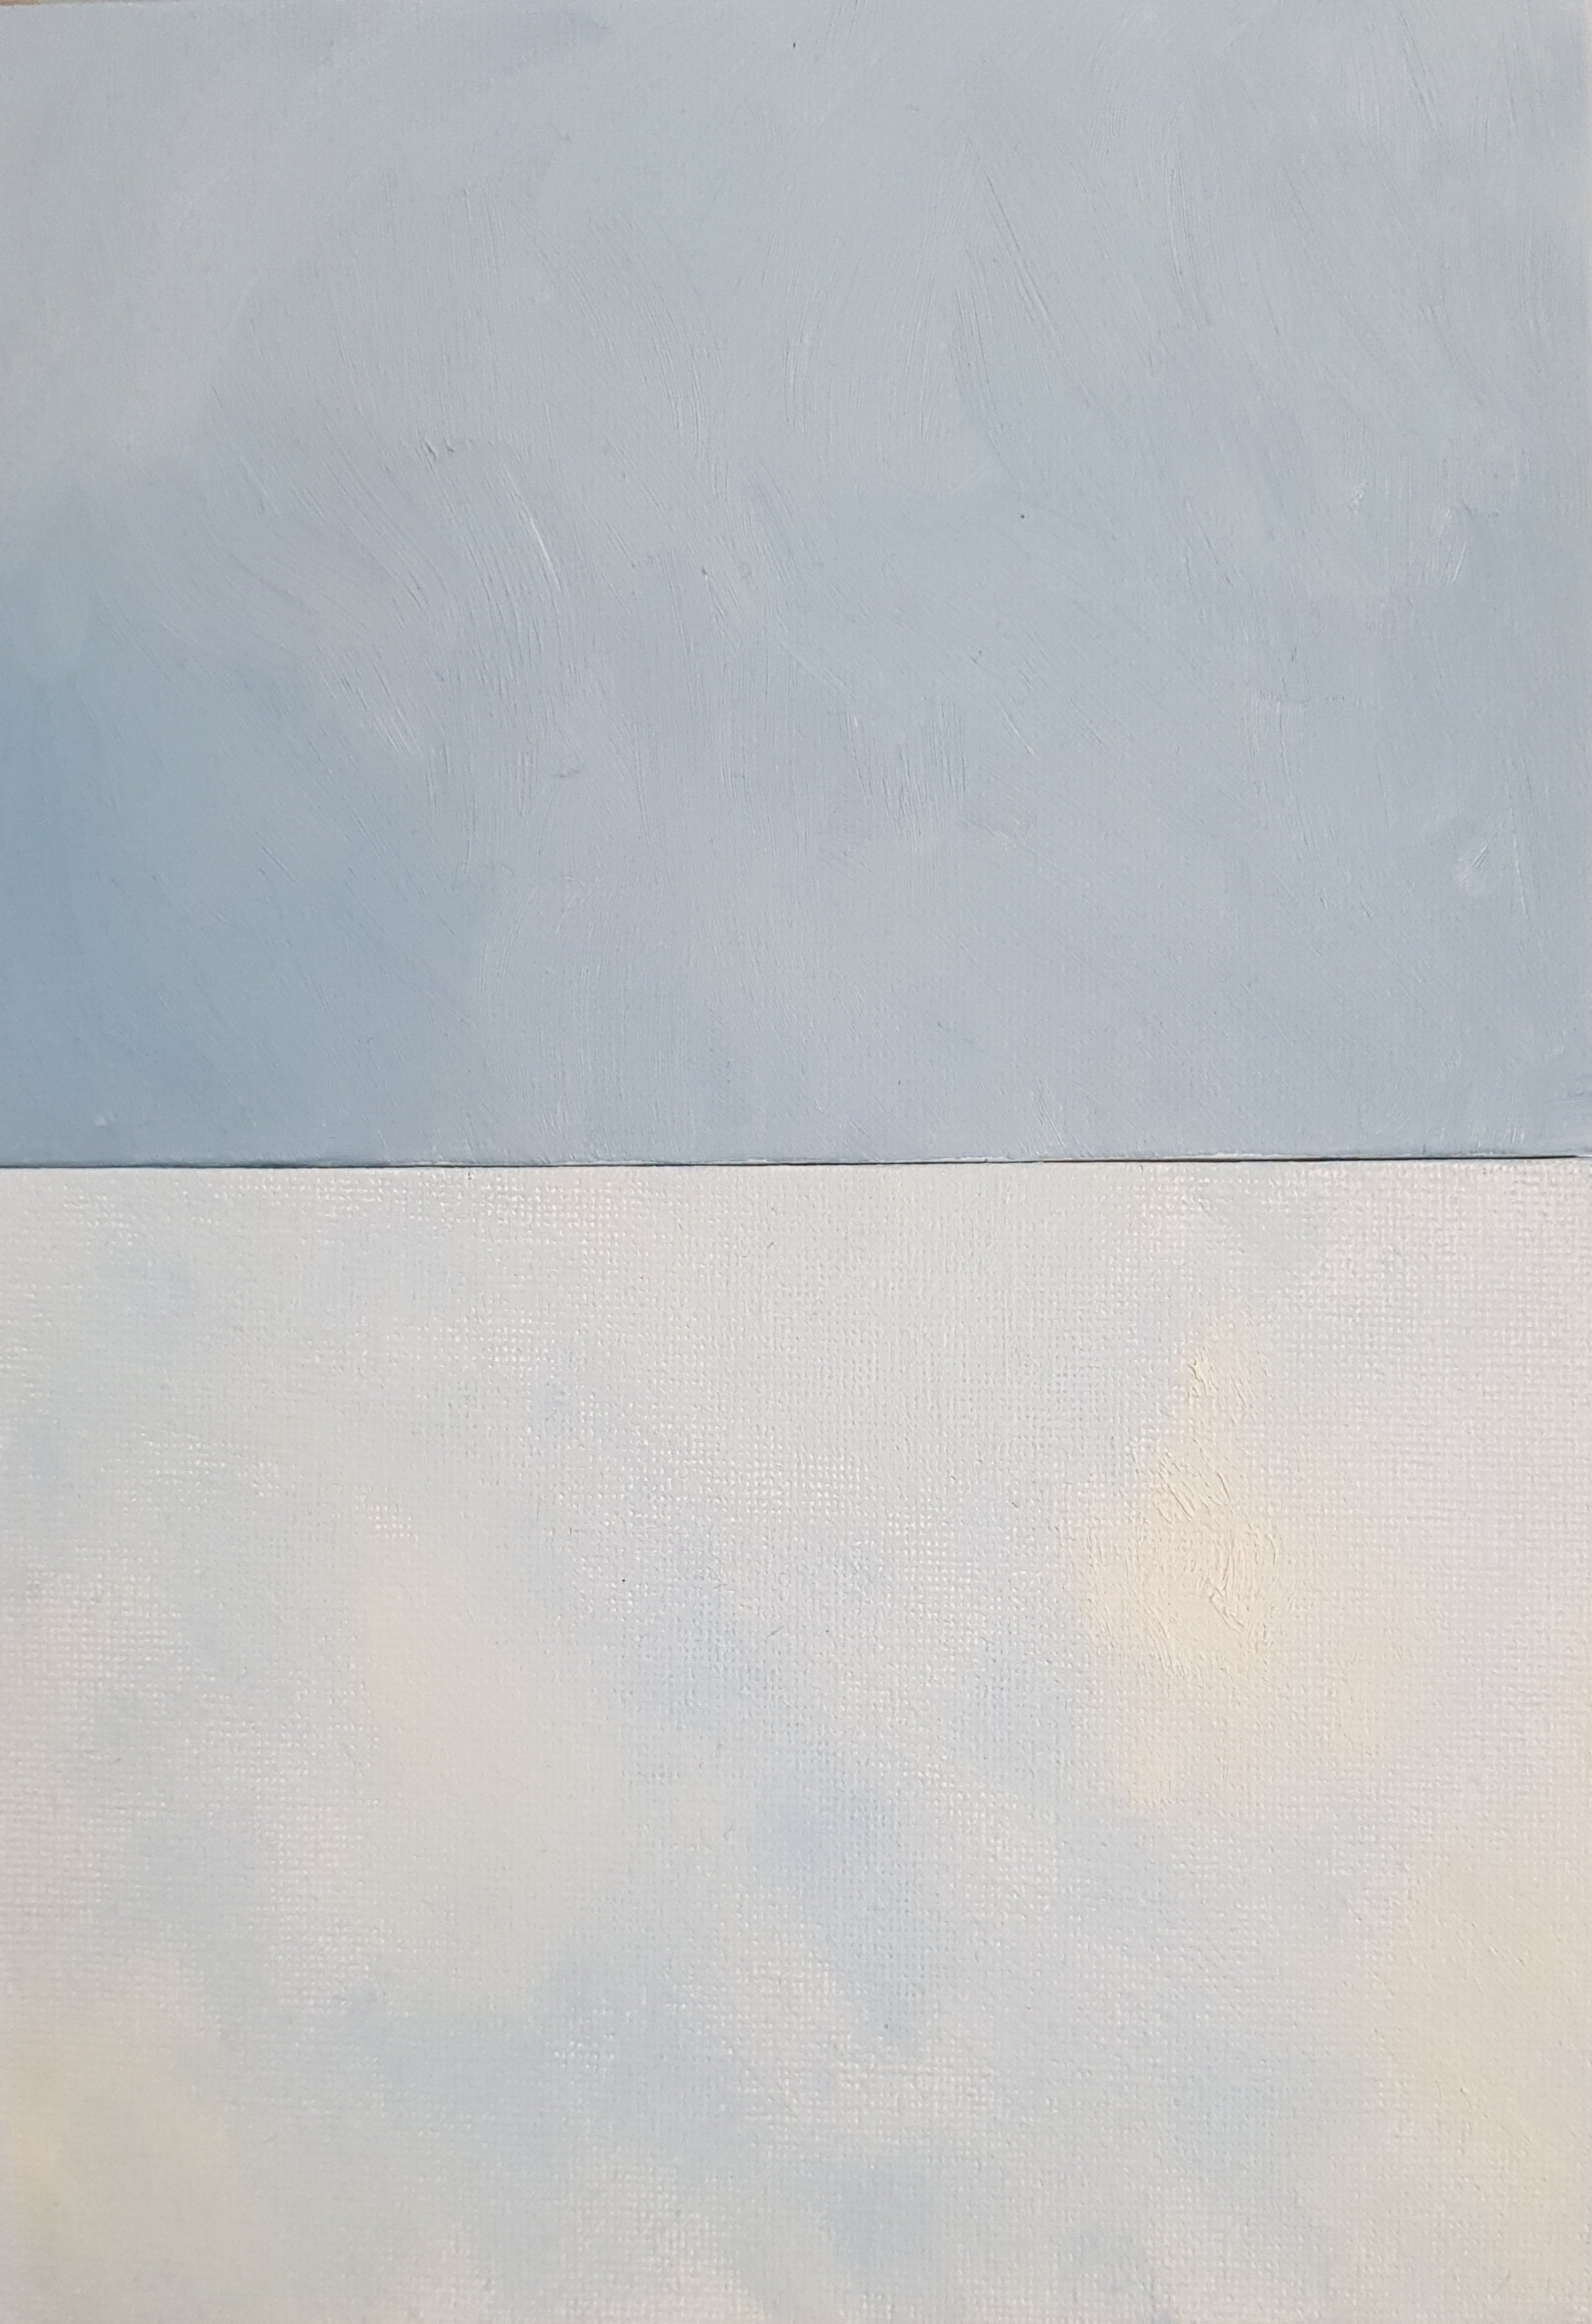 Skies No 21 and No 23, 2014 Oil on canvas 180 x 130 x 35 mm (each of diptych)